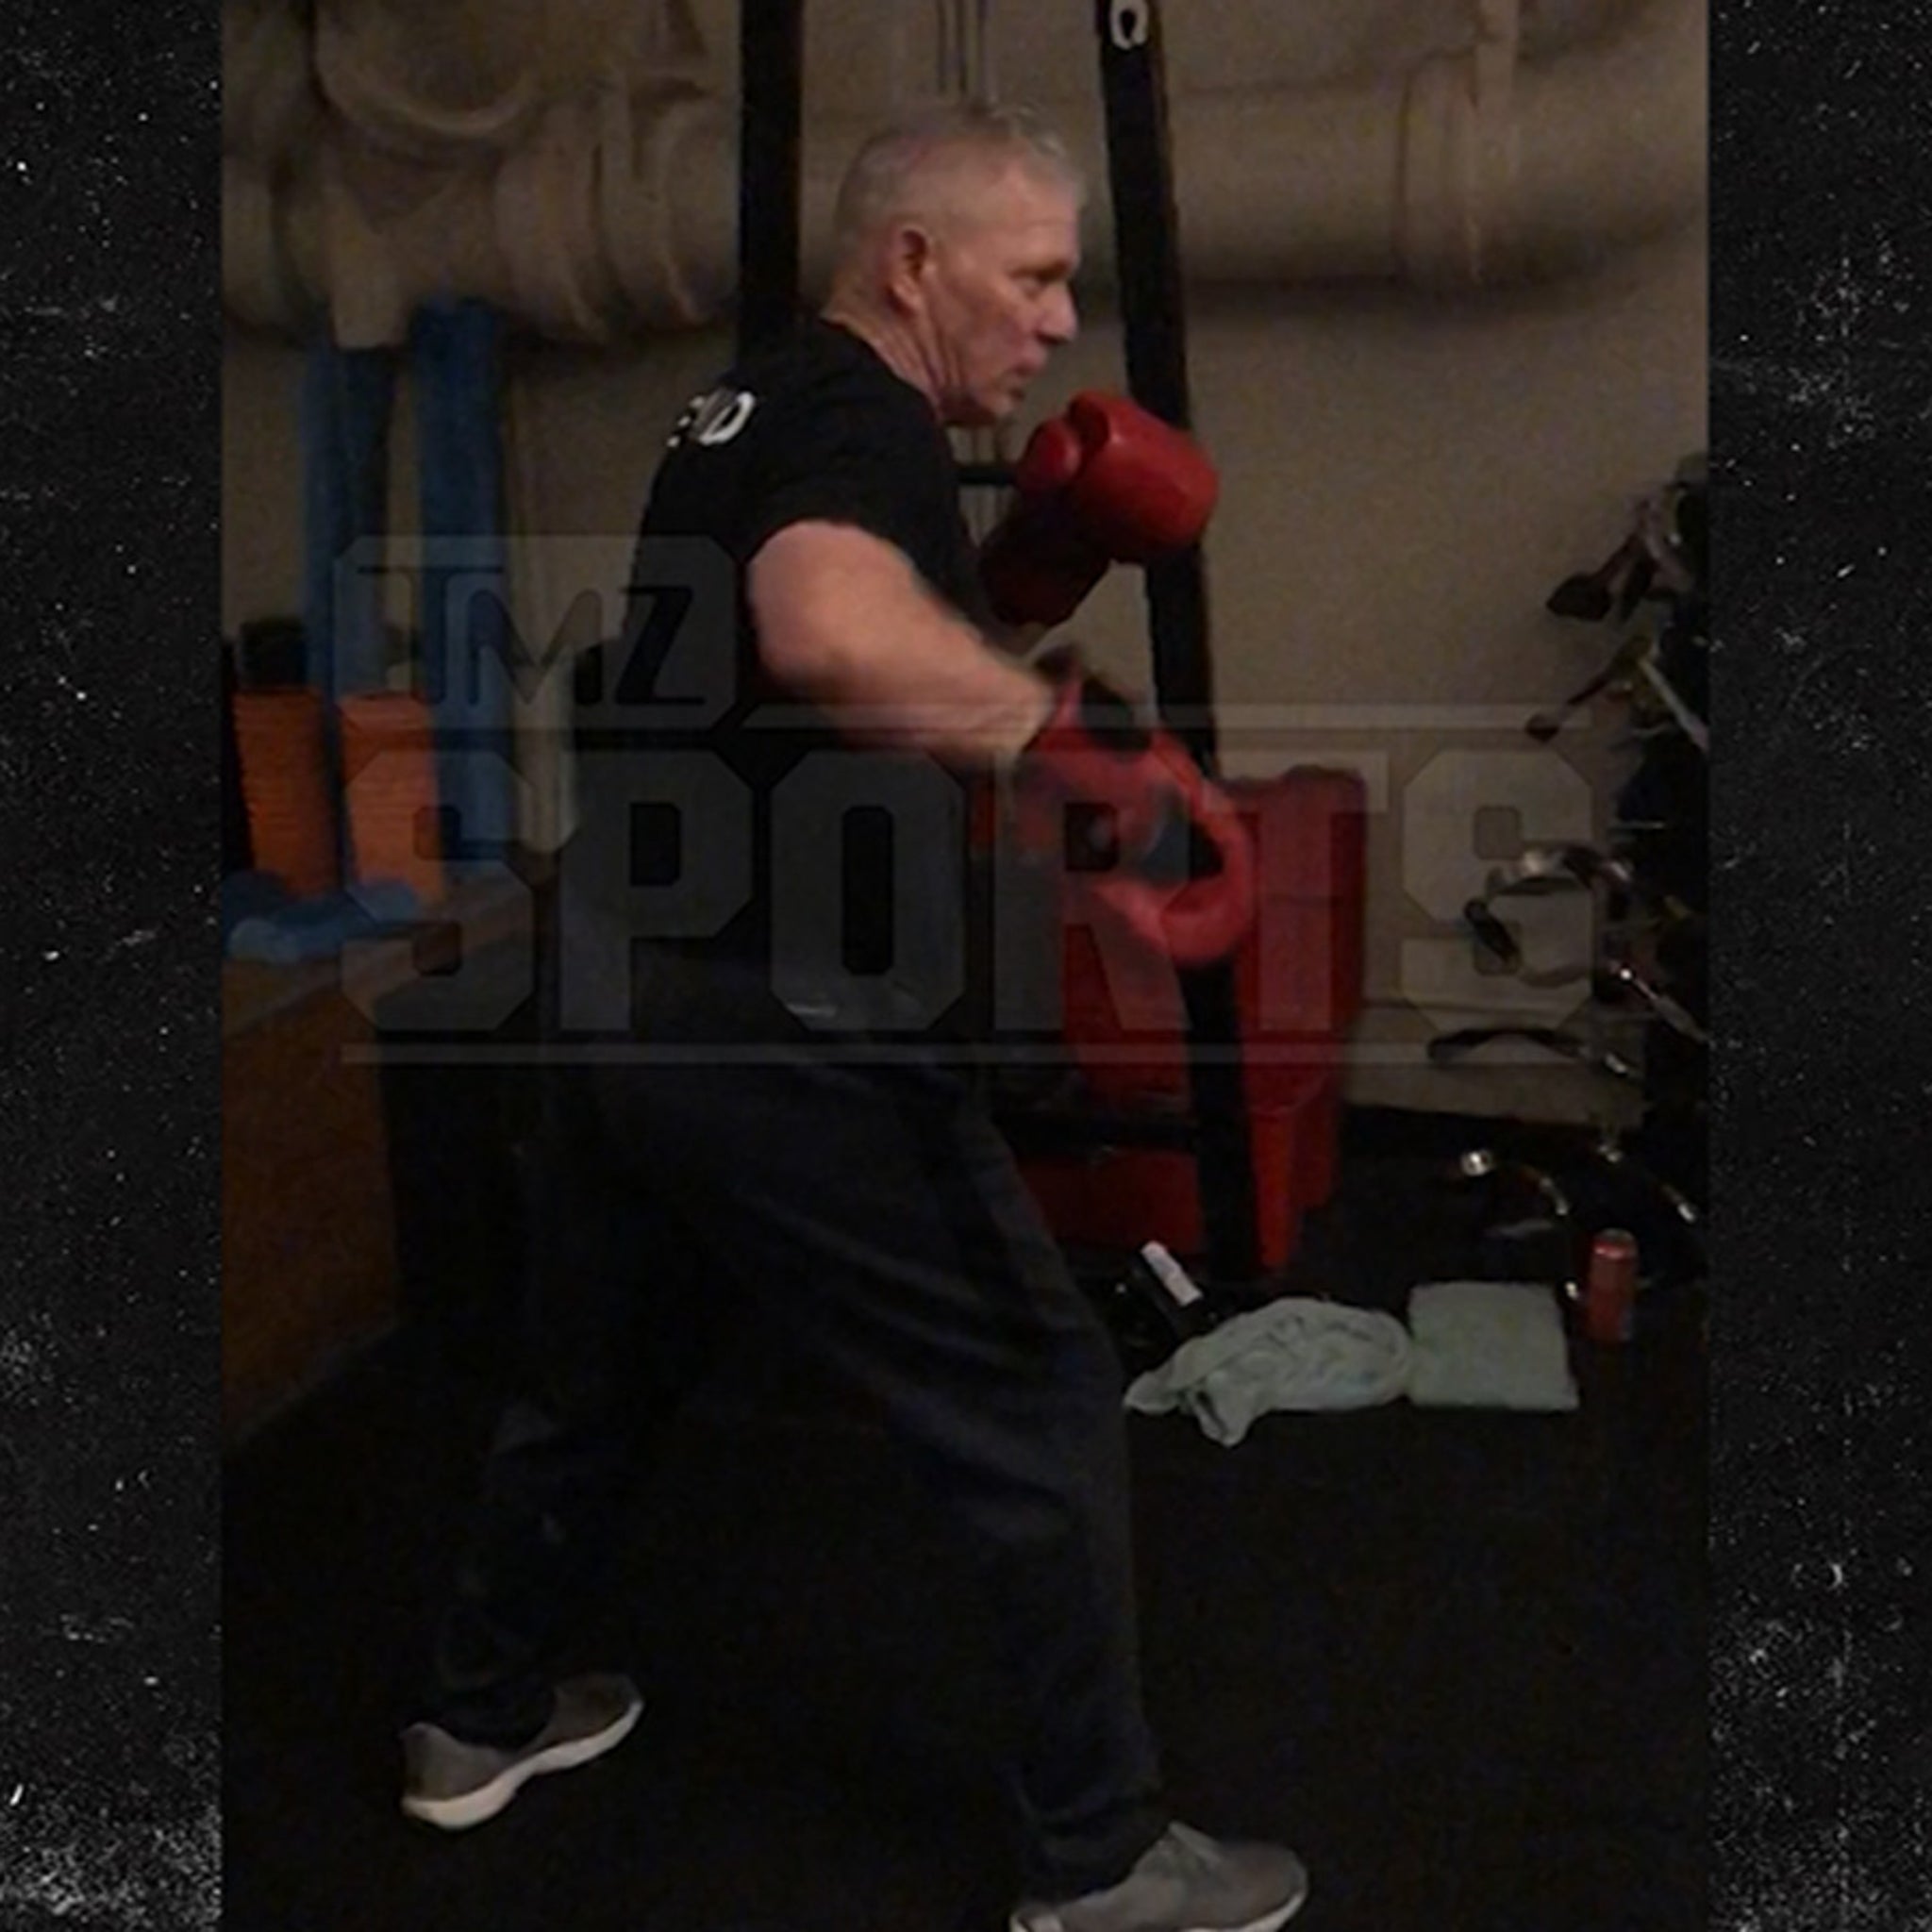 Lenny Dykstra Calls Off Bagel Guy Boxing Match, 'Won't Be Rescheduled